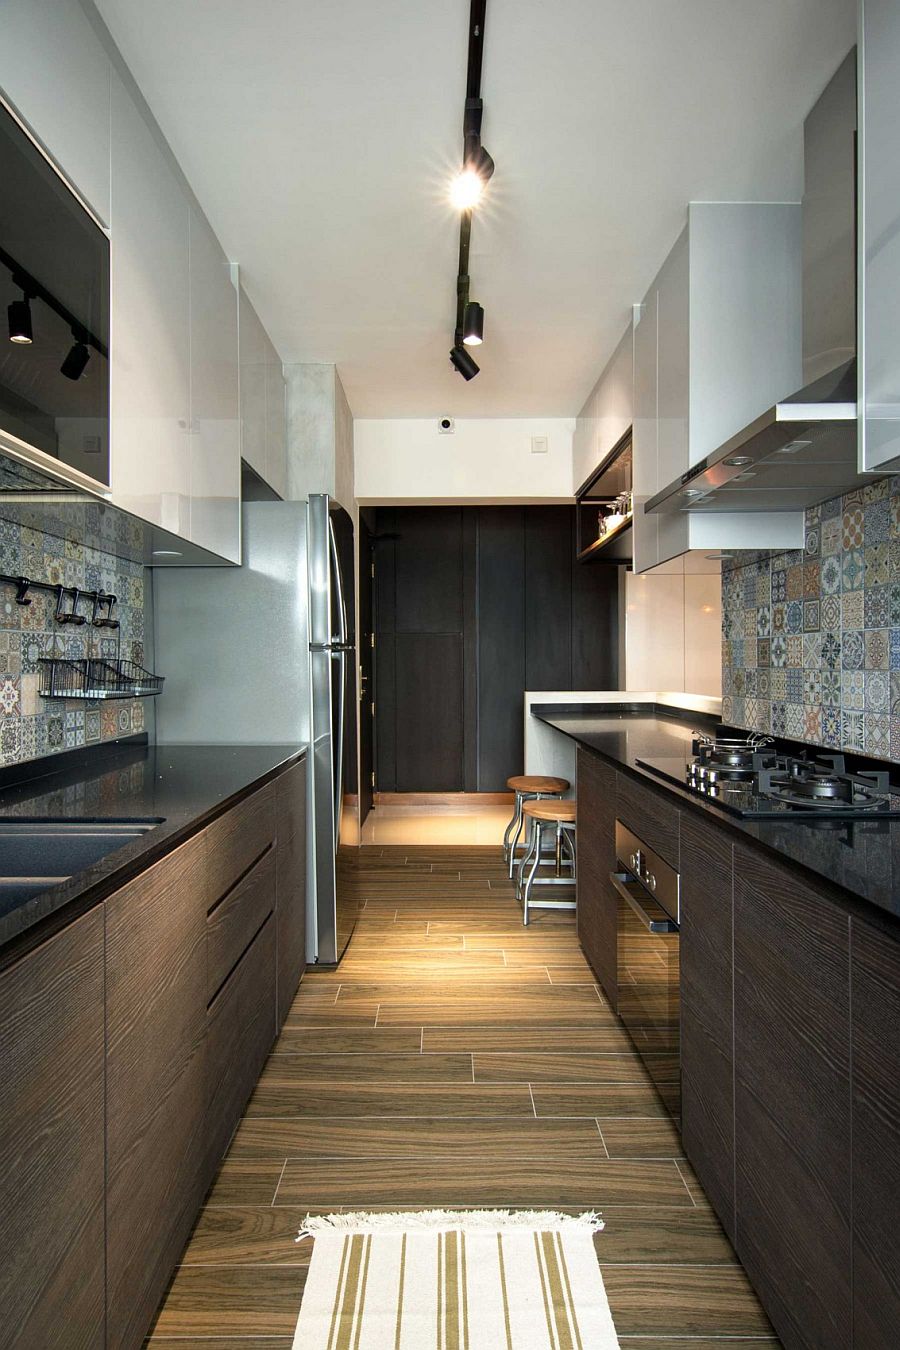 Small contemporary kitchen design inside stylish home in Singapore